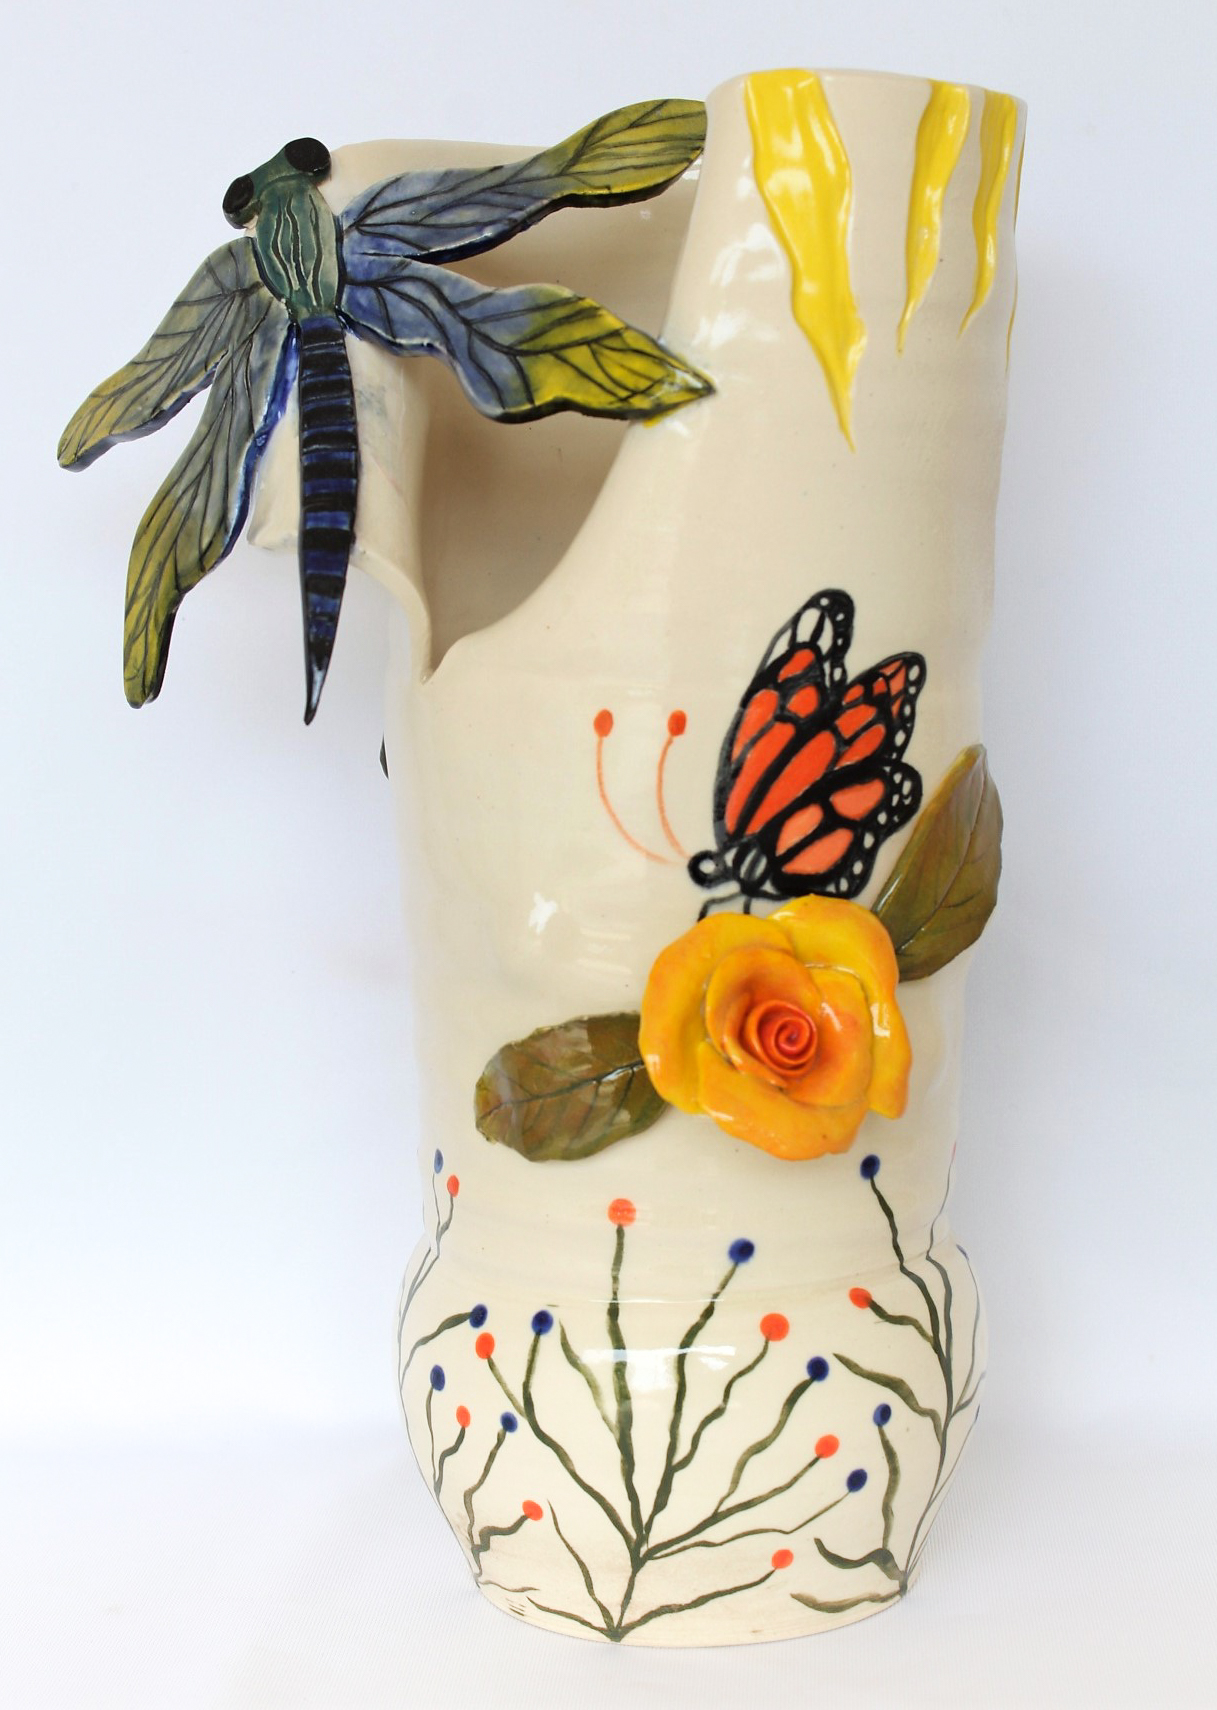 Ceramic vase with insects, flowers and fruit.